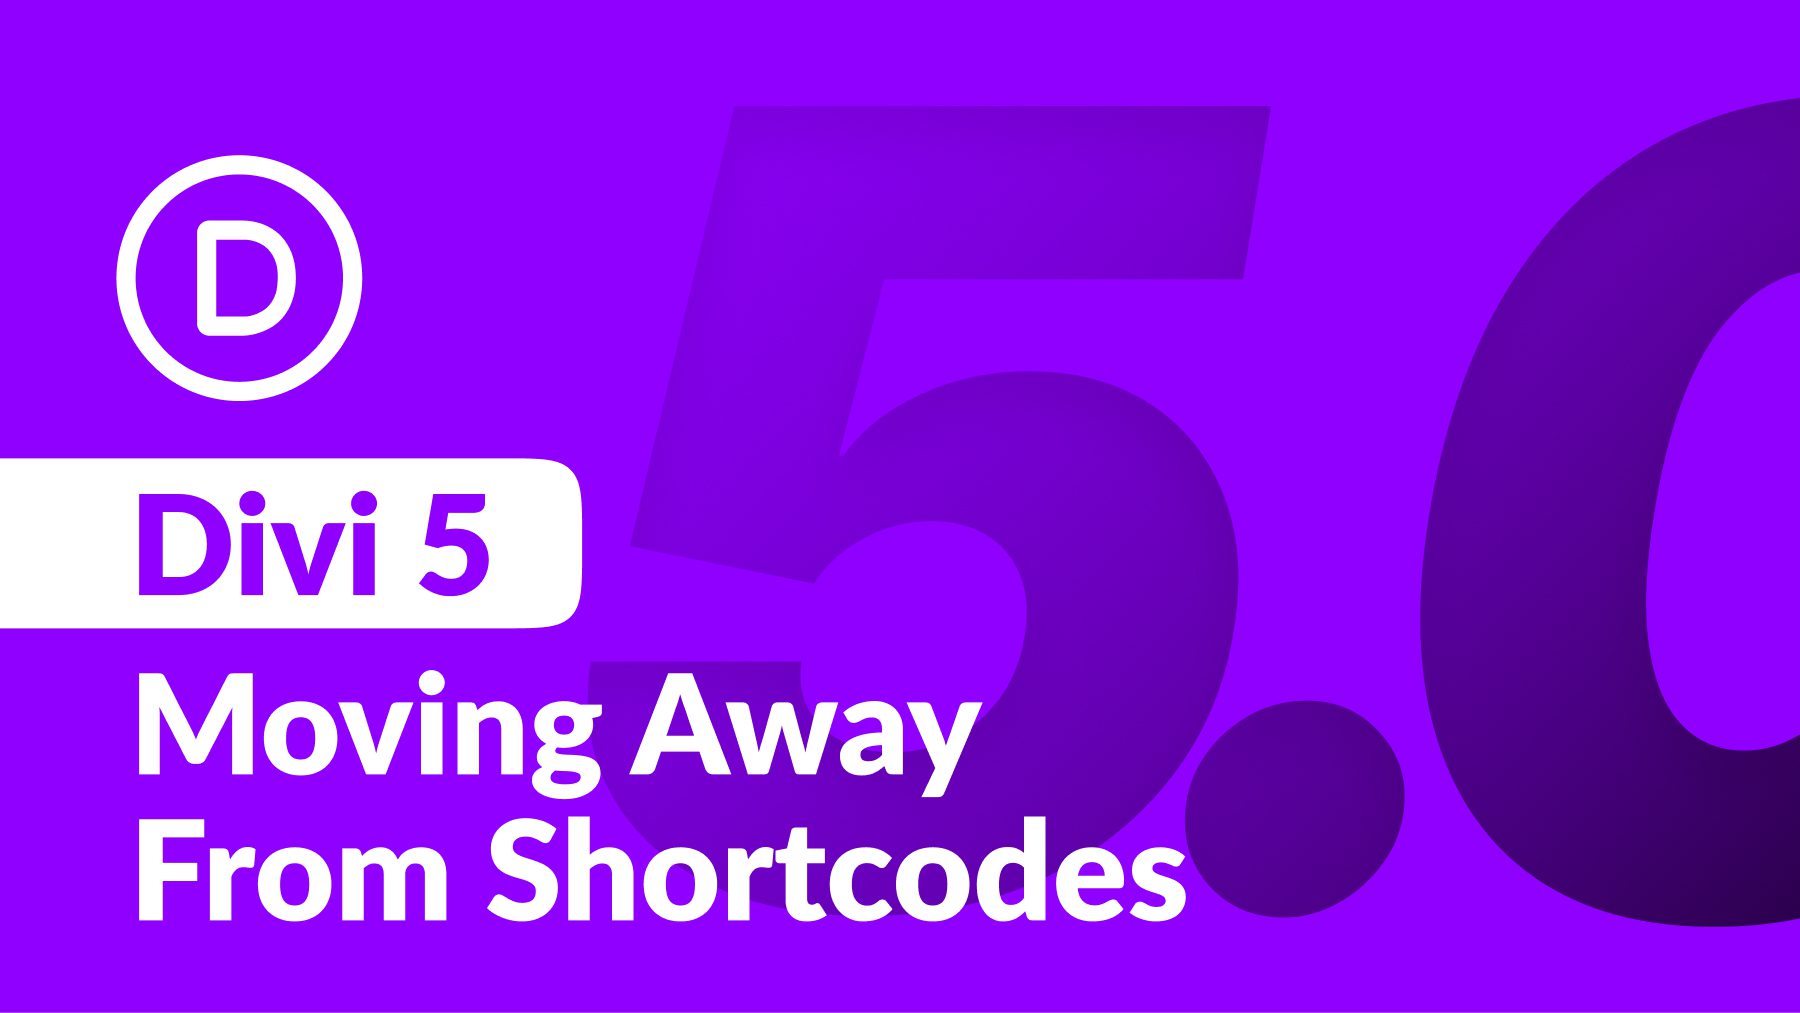 Divi 5 And The Move Away From Shortcodes